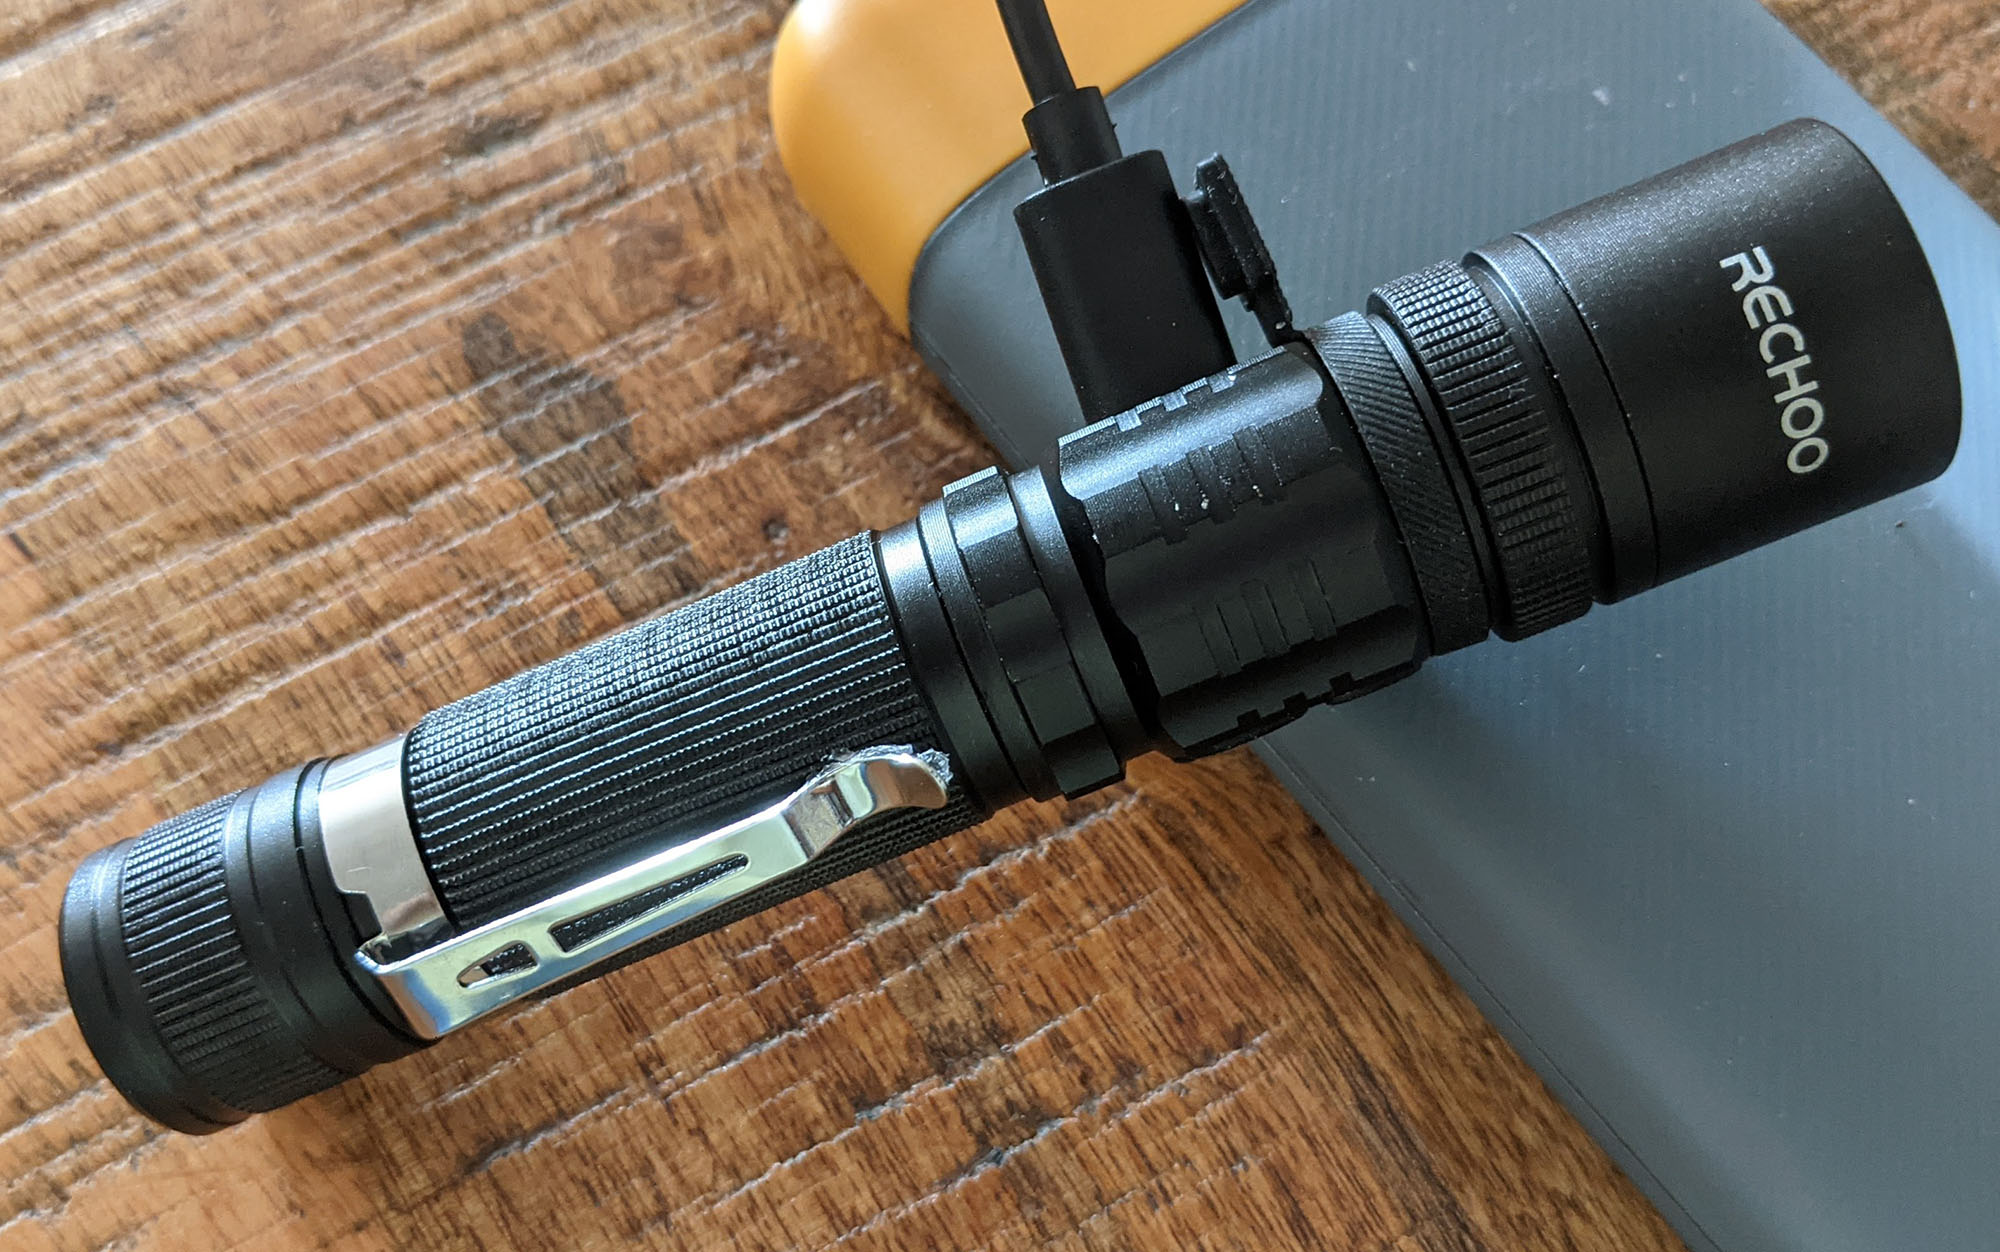 The Rechoo S3000L is one of the best rechargeable flashlights.